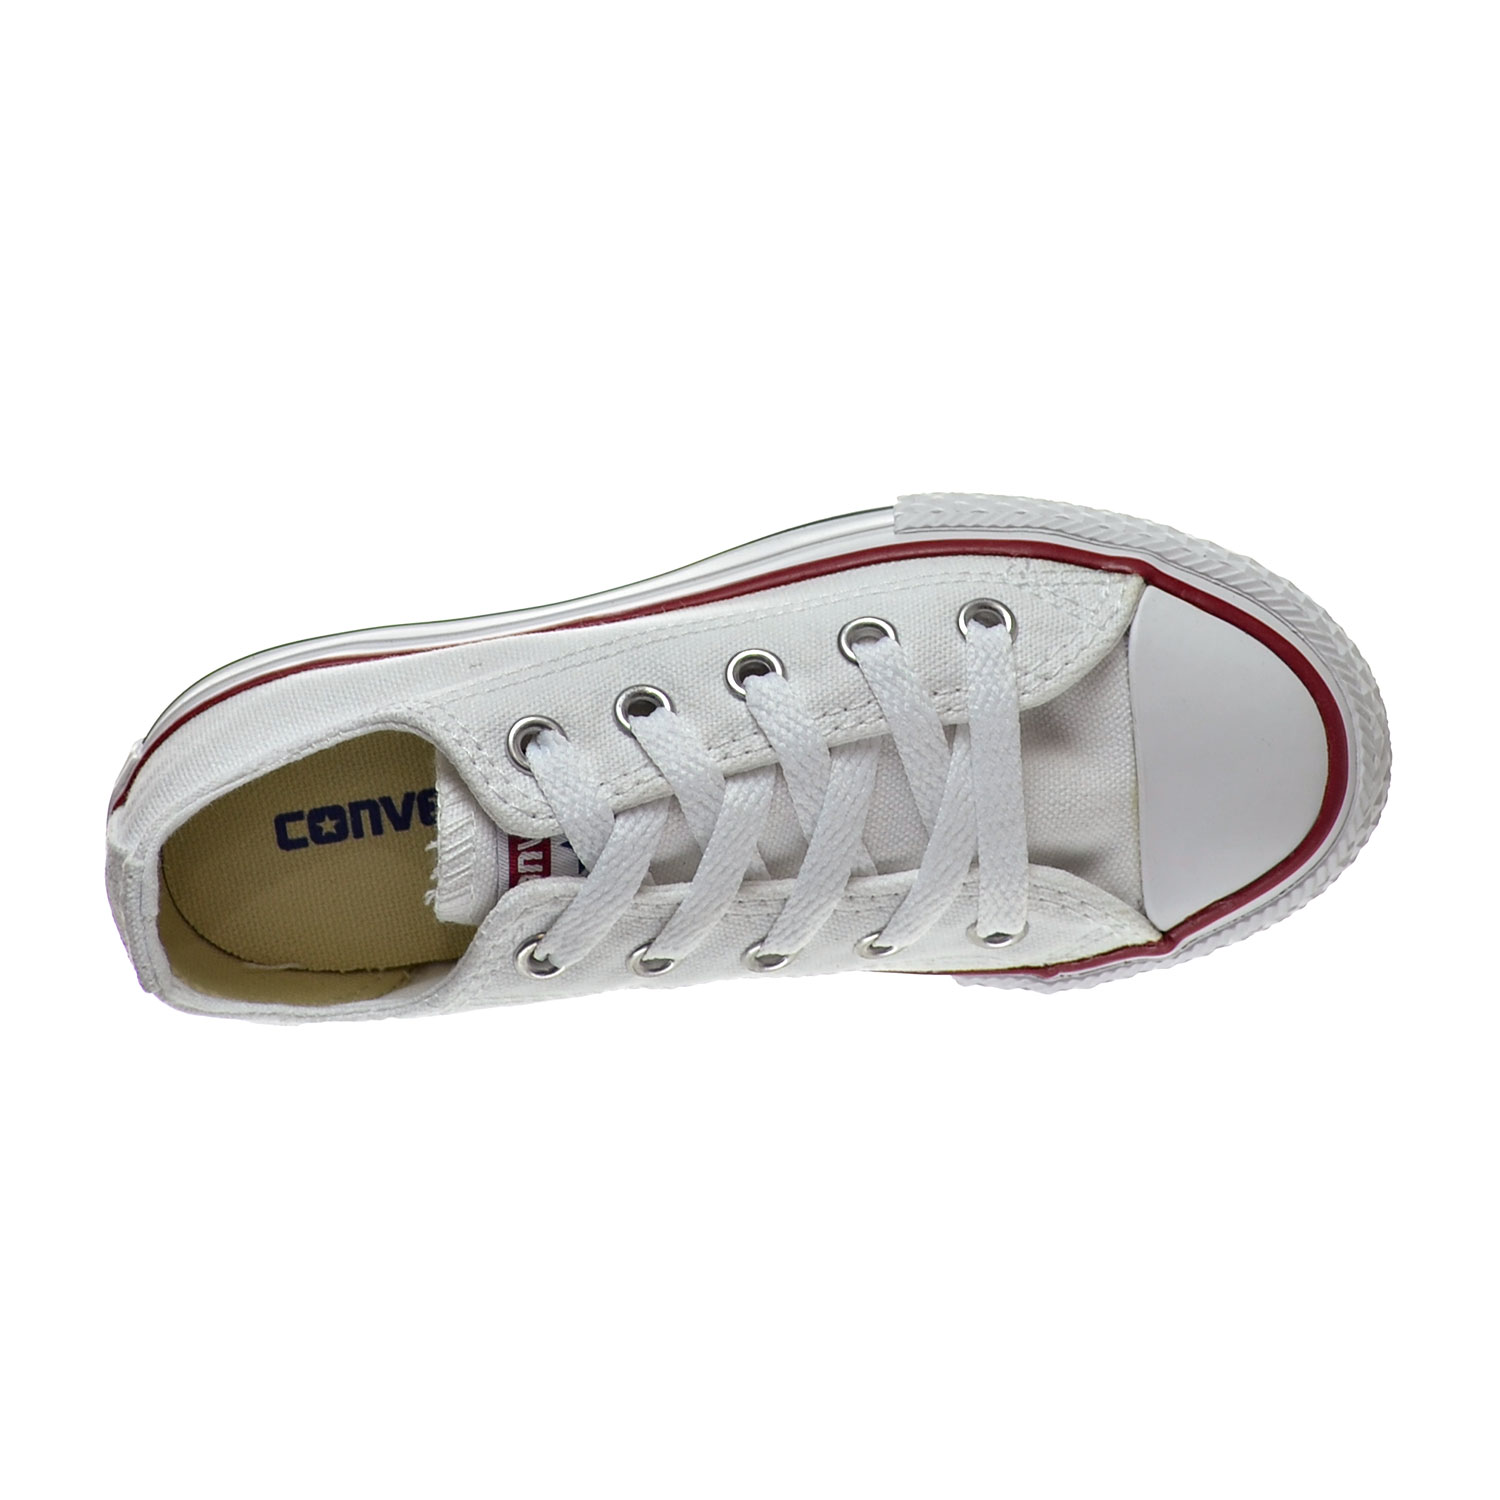 Converse Chuck Taylor All Star Optical White Little Kid's Shoes 3j256 (10.5 M US)